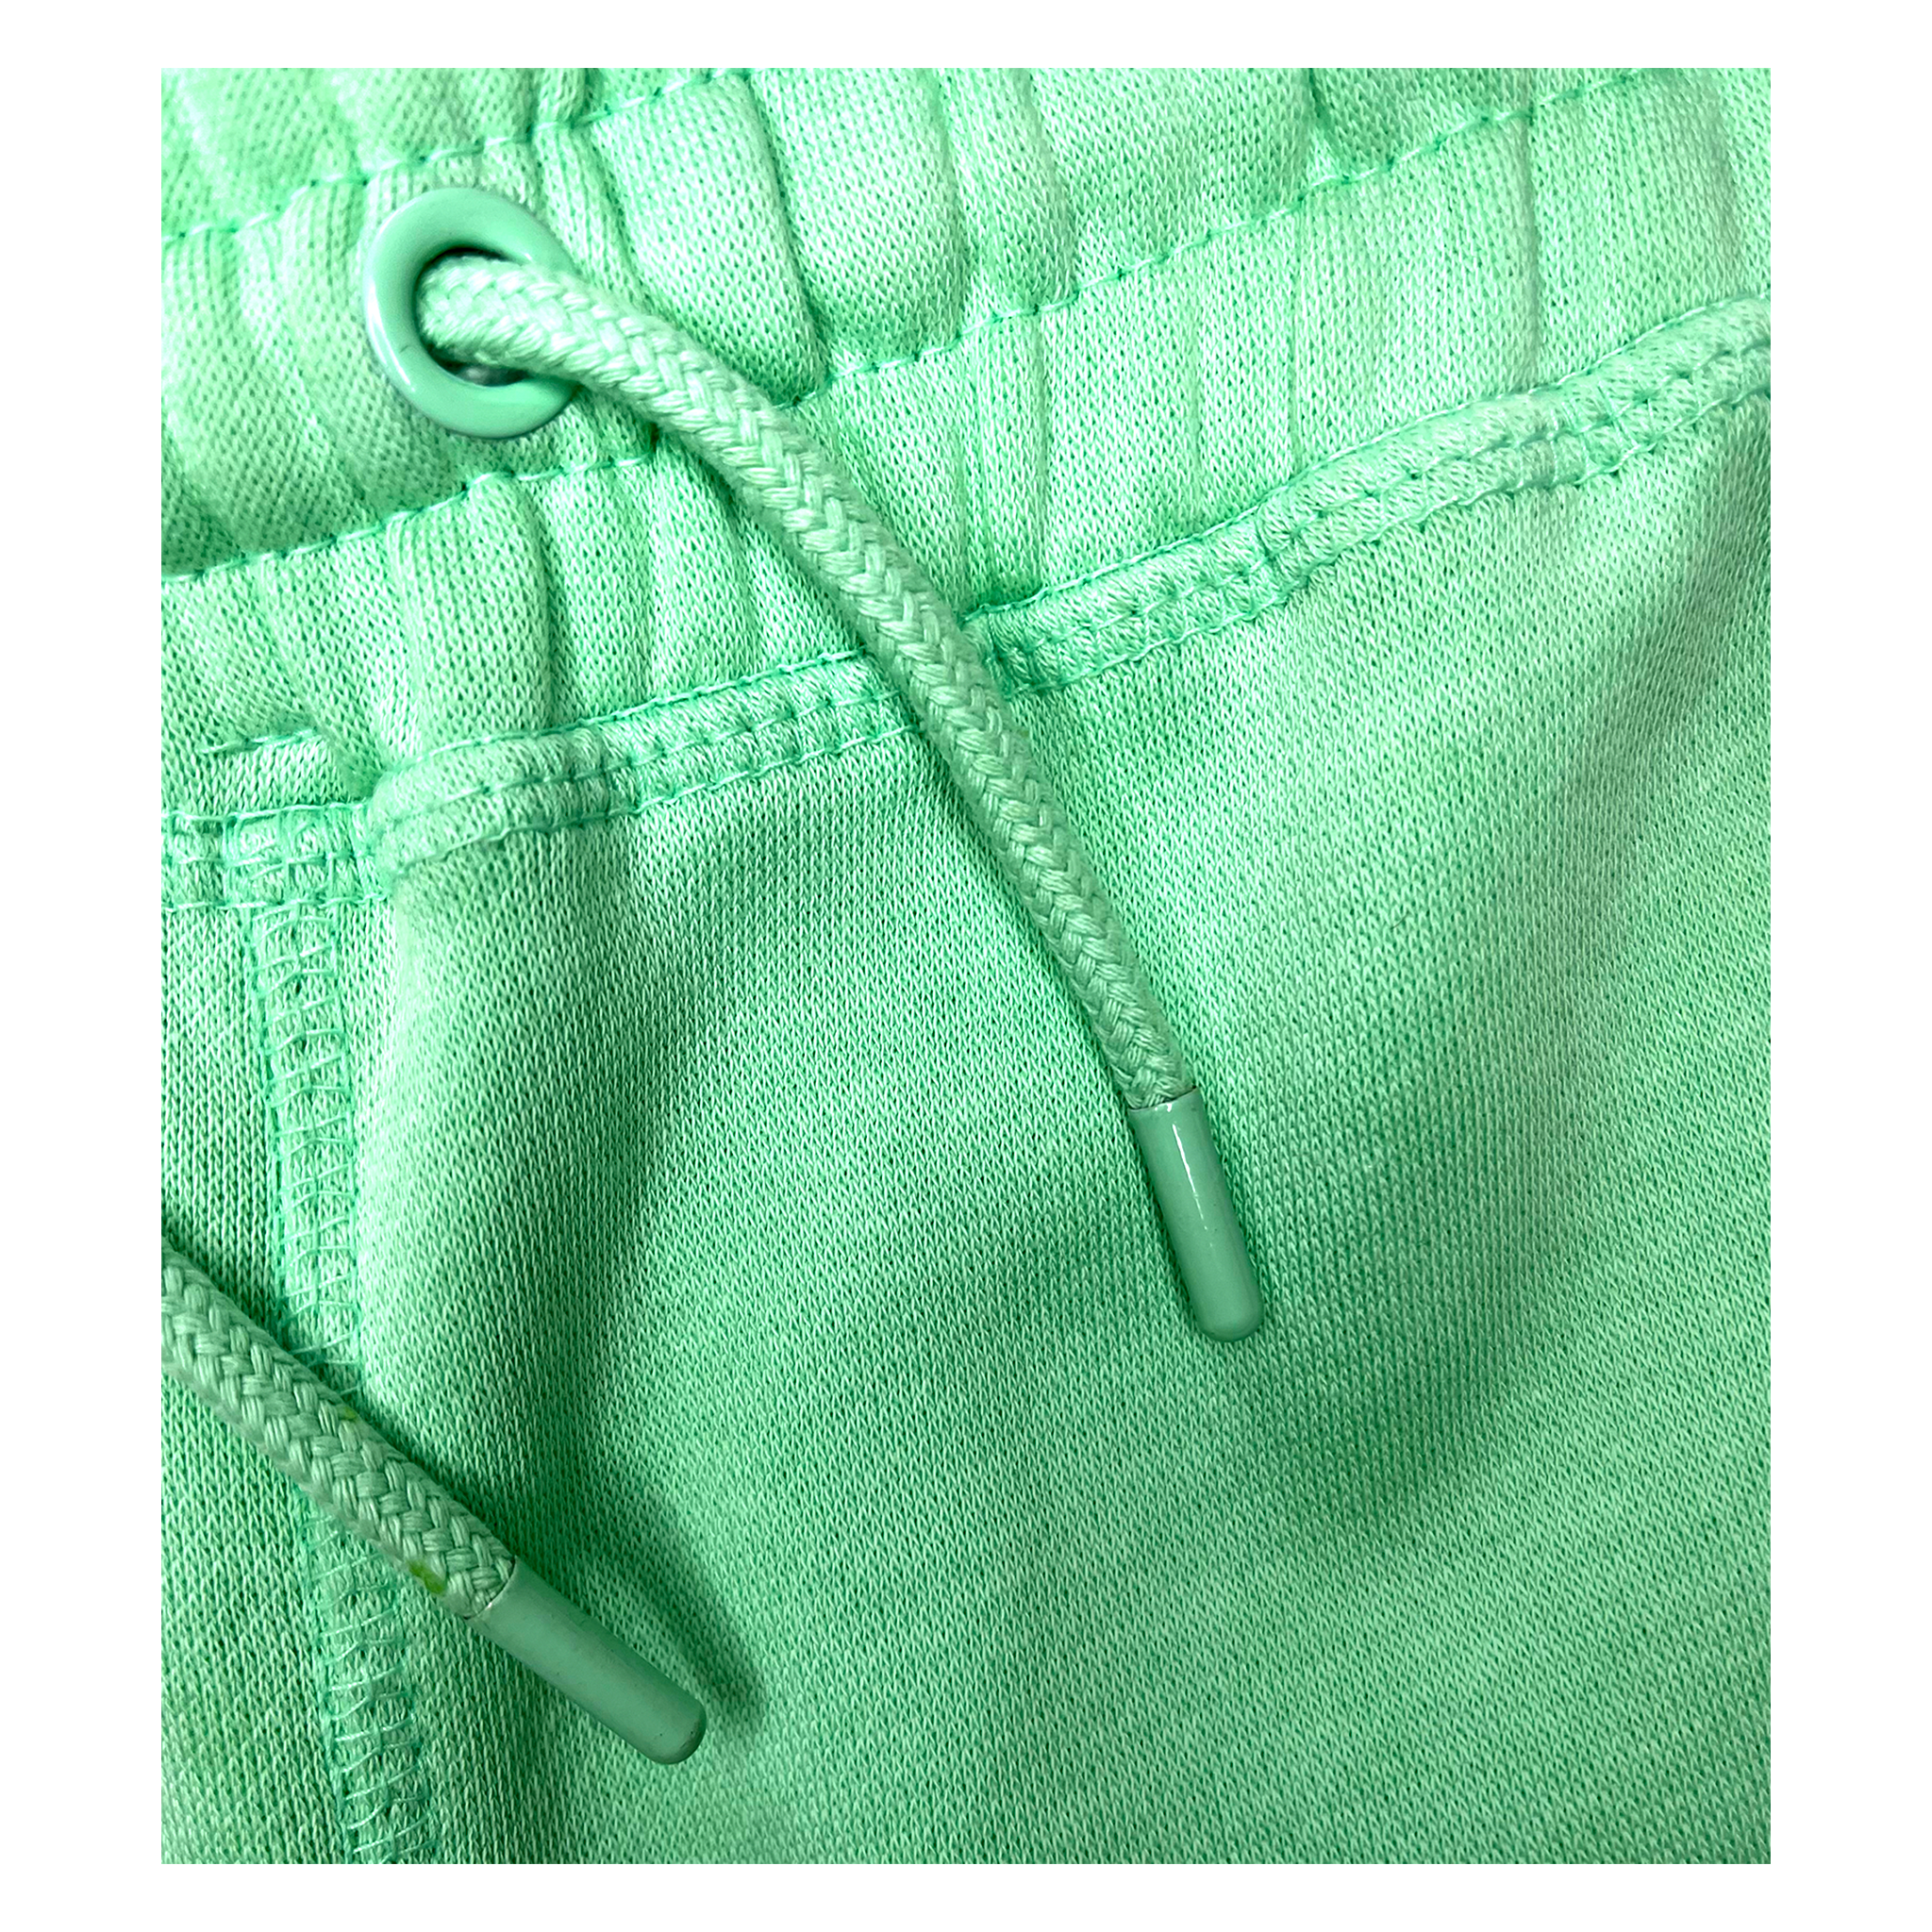 Metal eyelets and tips for drawstring of Mint Hustle Shorts